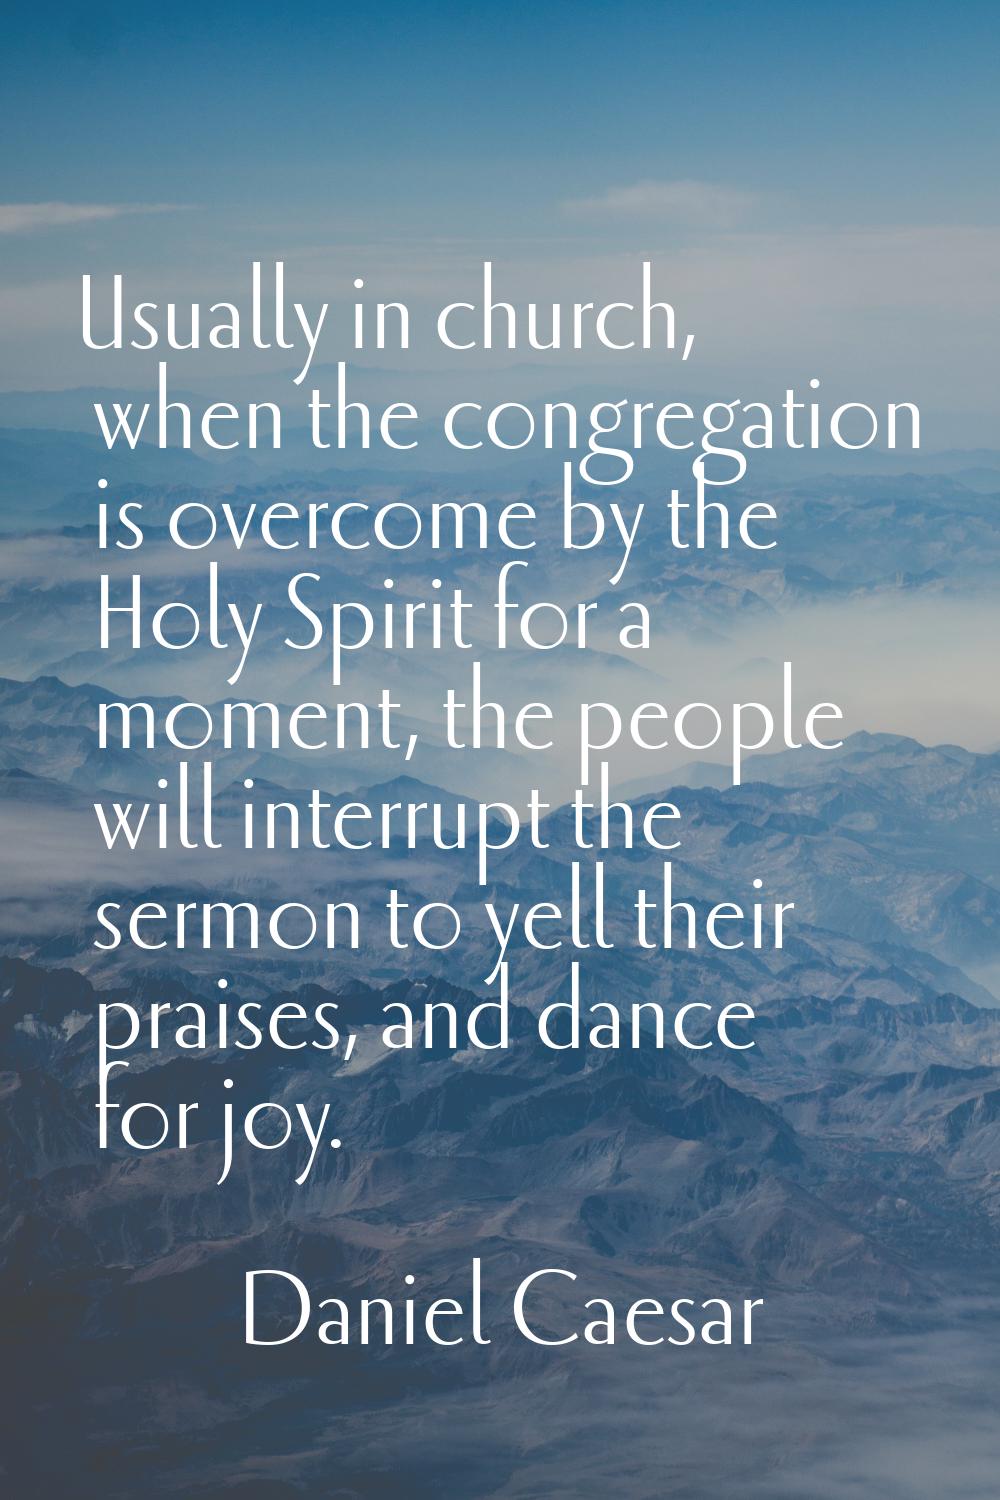 Usually in church, when the congregation is overcome by the Holy Spirit for a moment, the people wi